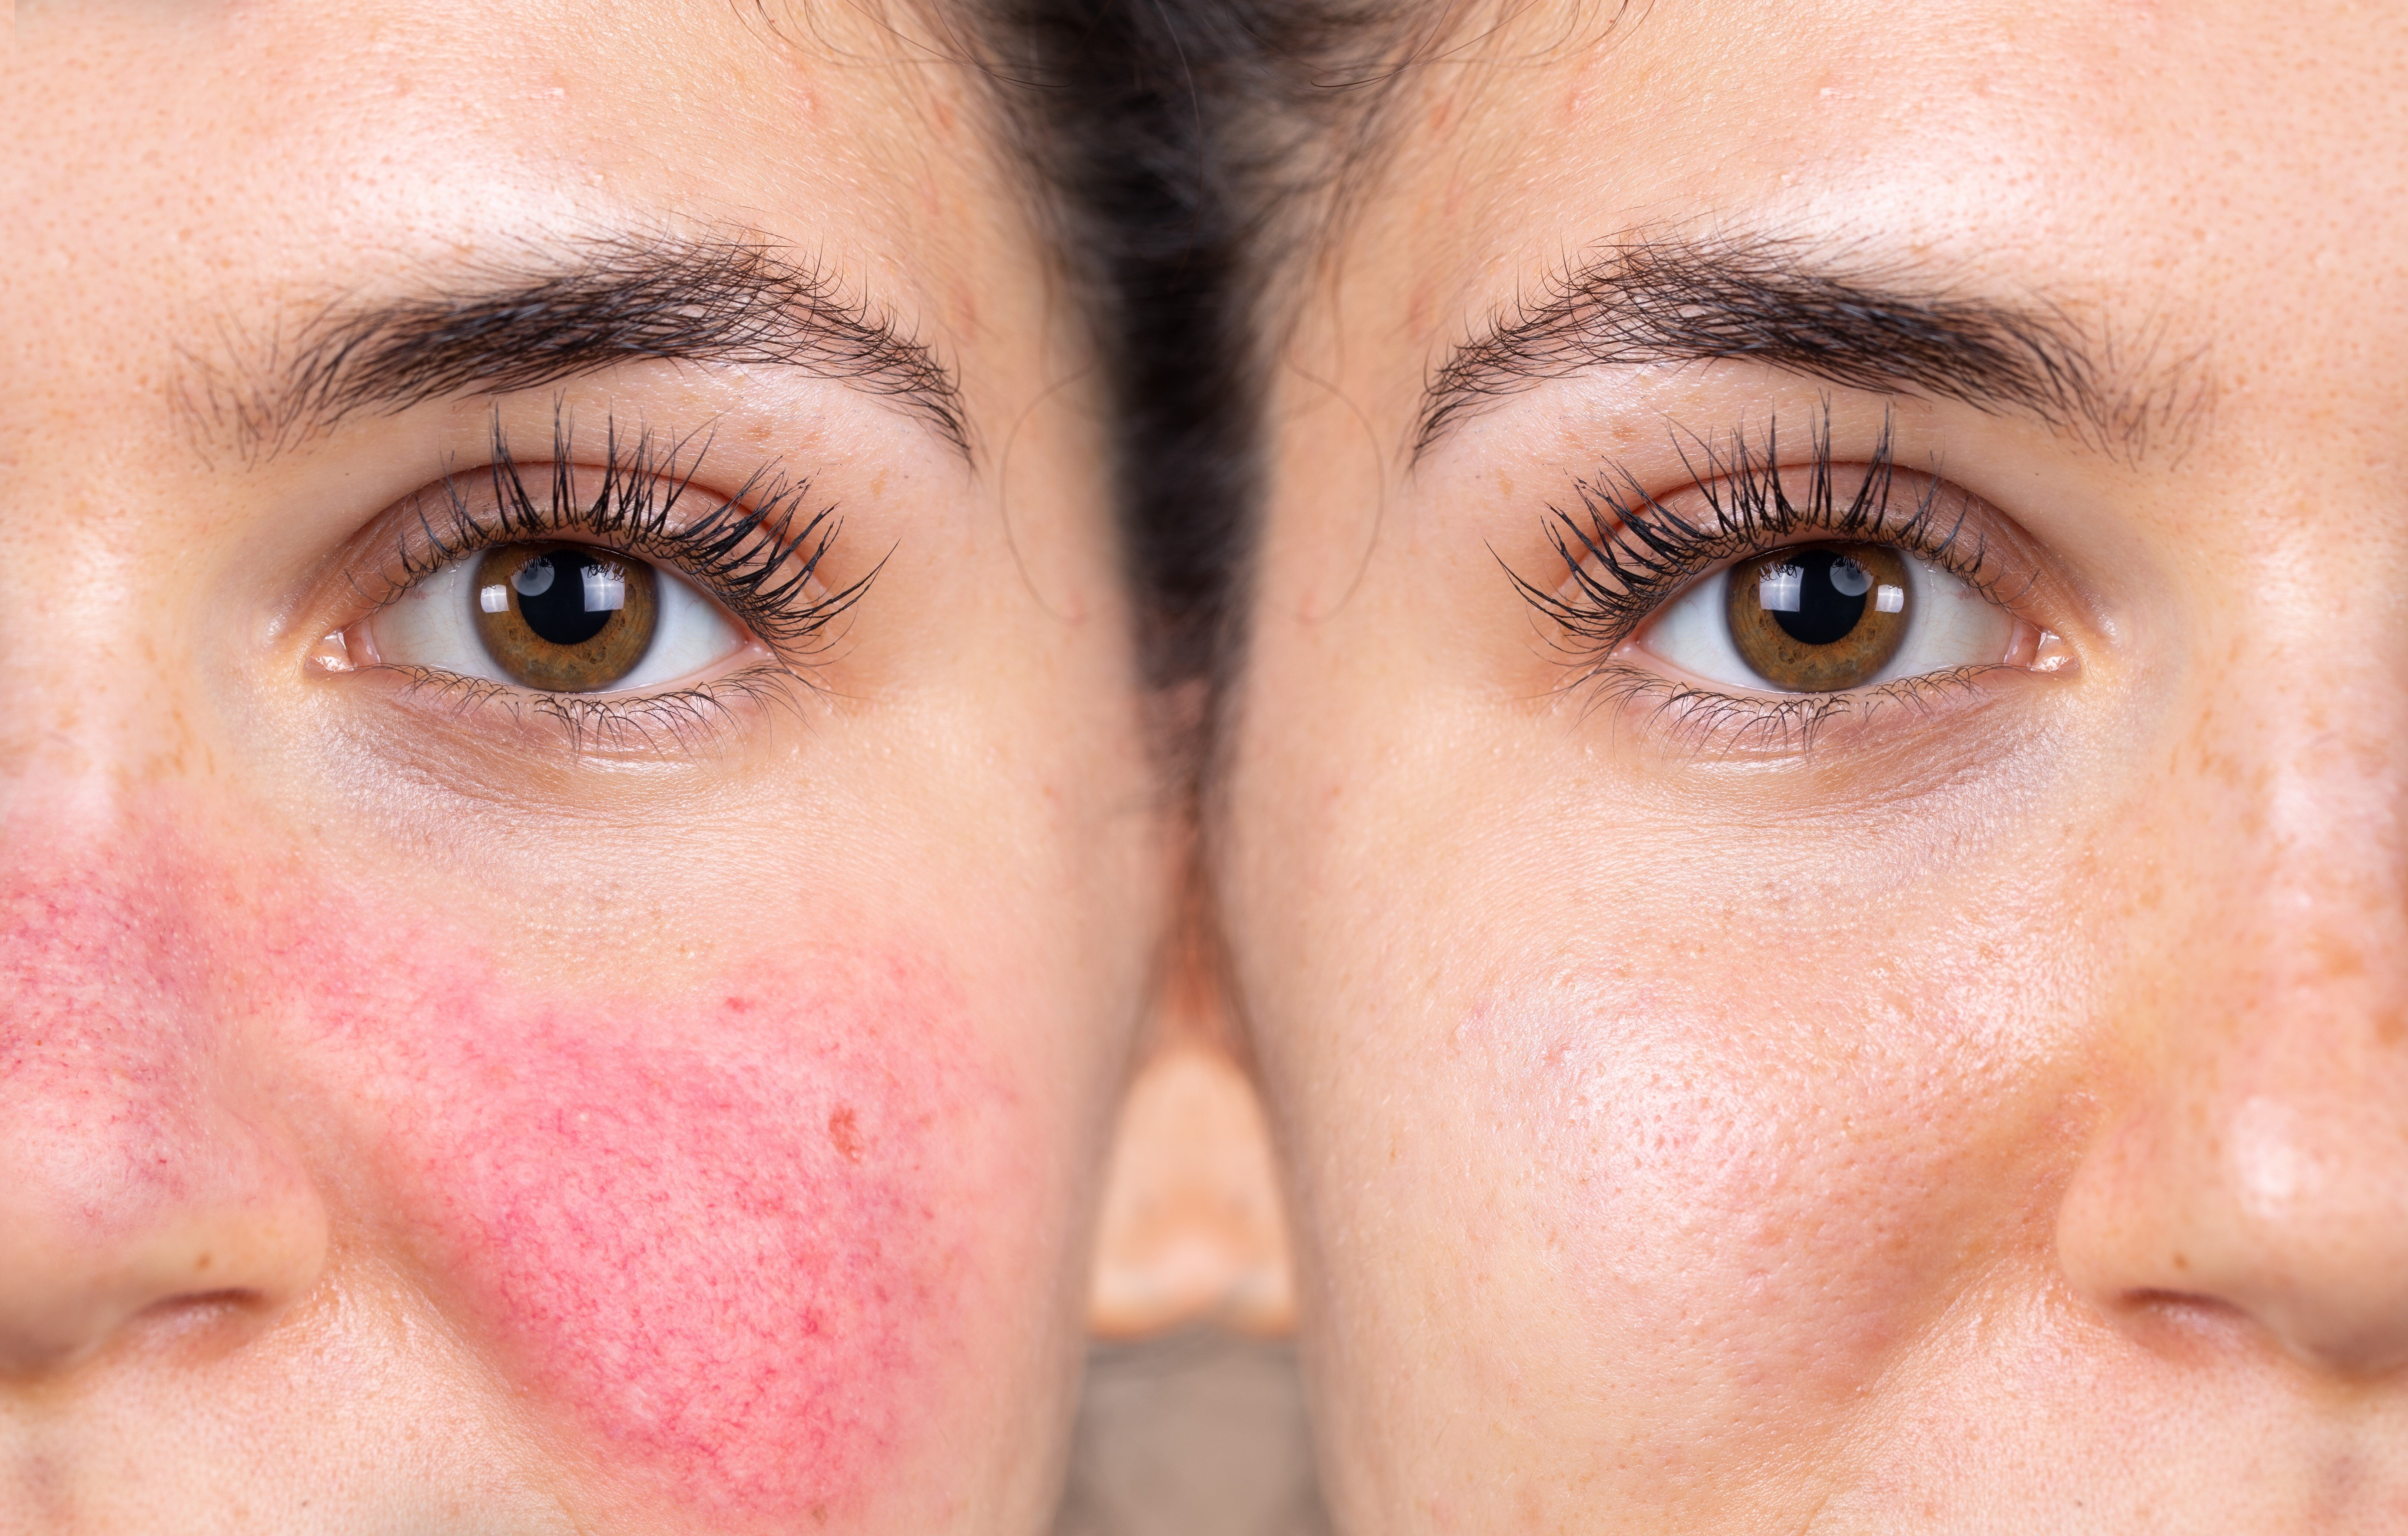 Rosacea happens to people whose skin is supersensitive, and makes it more so. Its cause is not yet well understood. Sufferers can control and mask it, though. Photo: Shutterstock